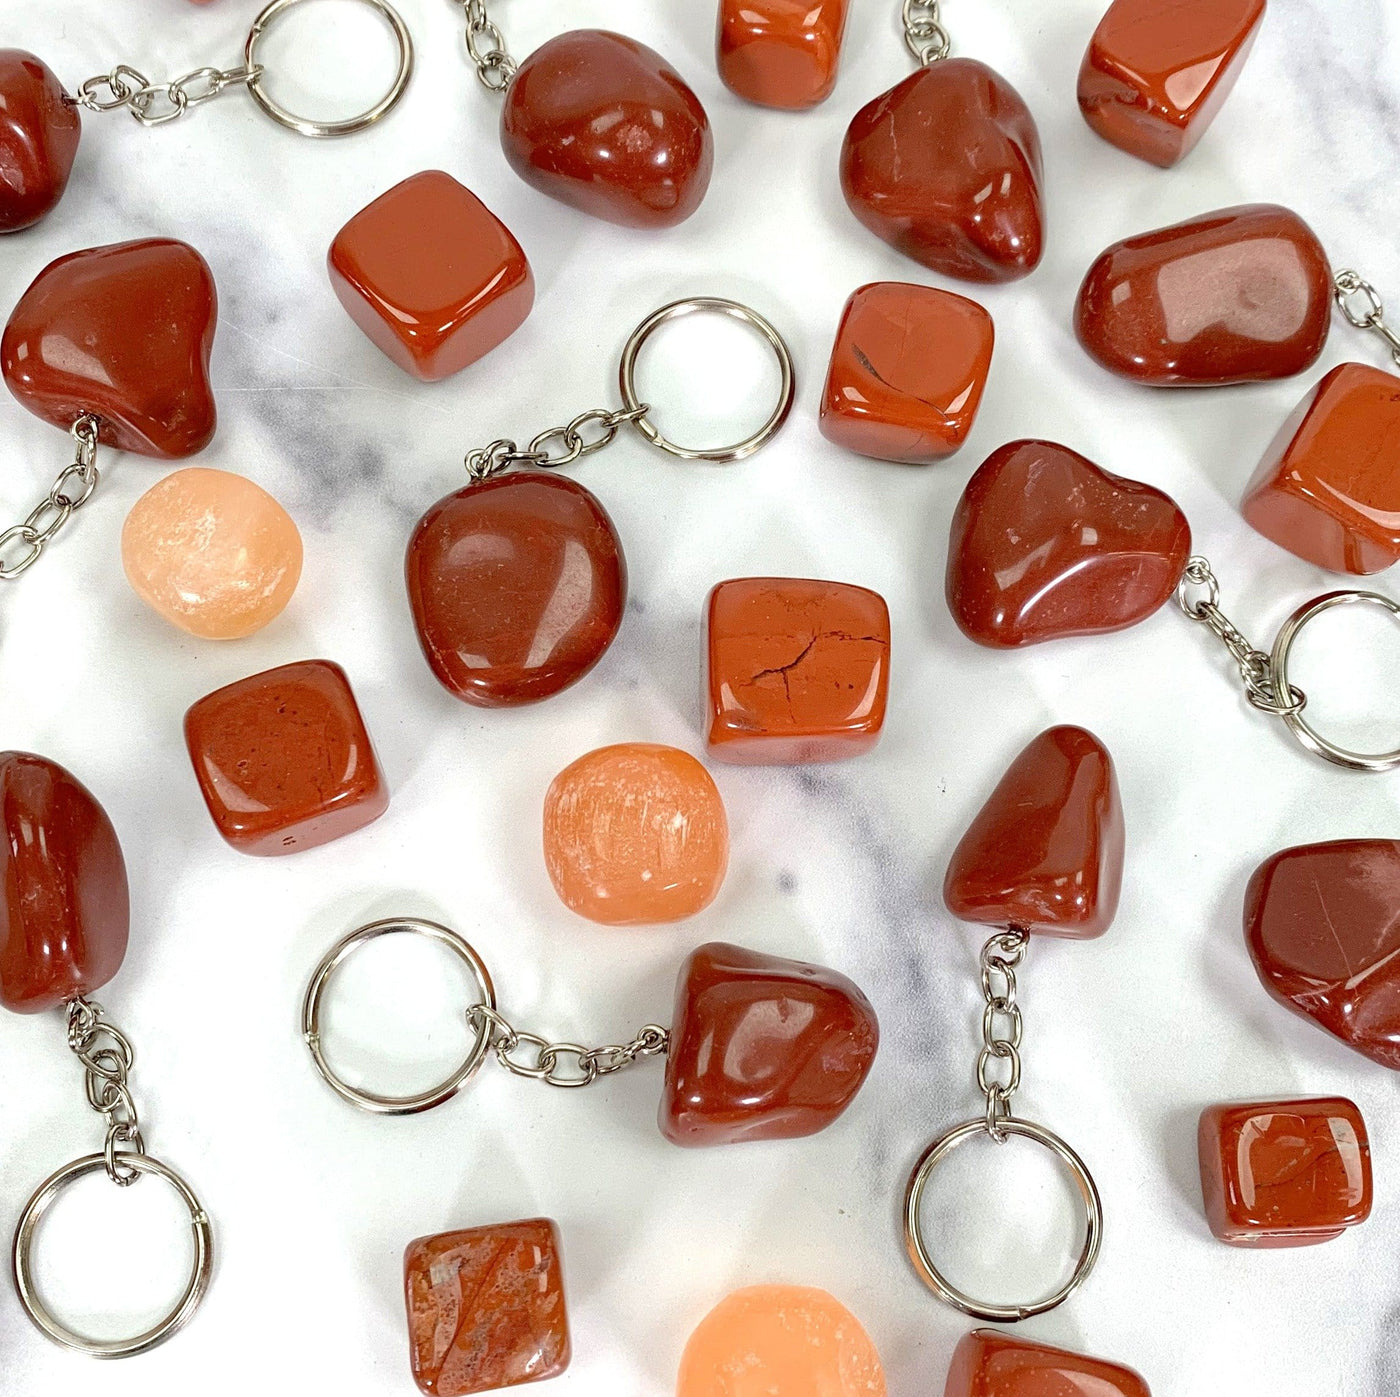 multiple Tumbled Red Jasper Keychains showing various hues shapes textures